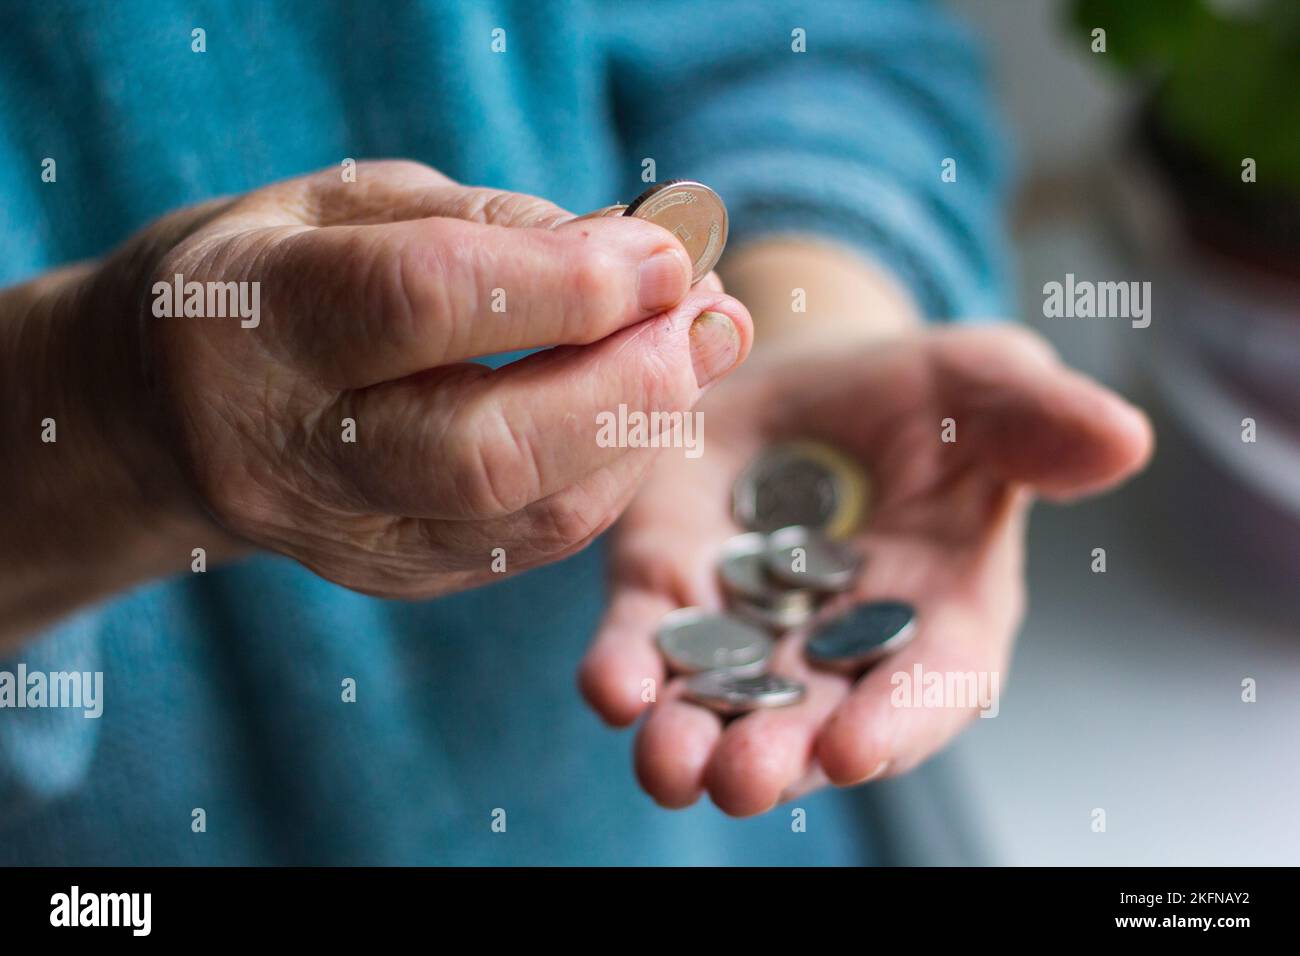 Grandma's wrinkled hands hold change in poverty Stock Photo